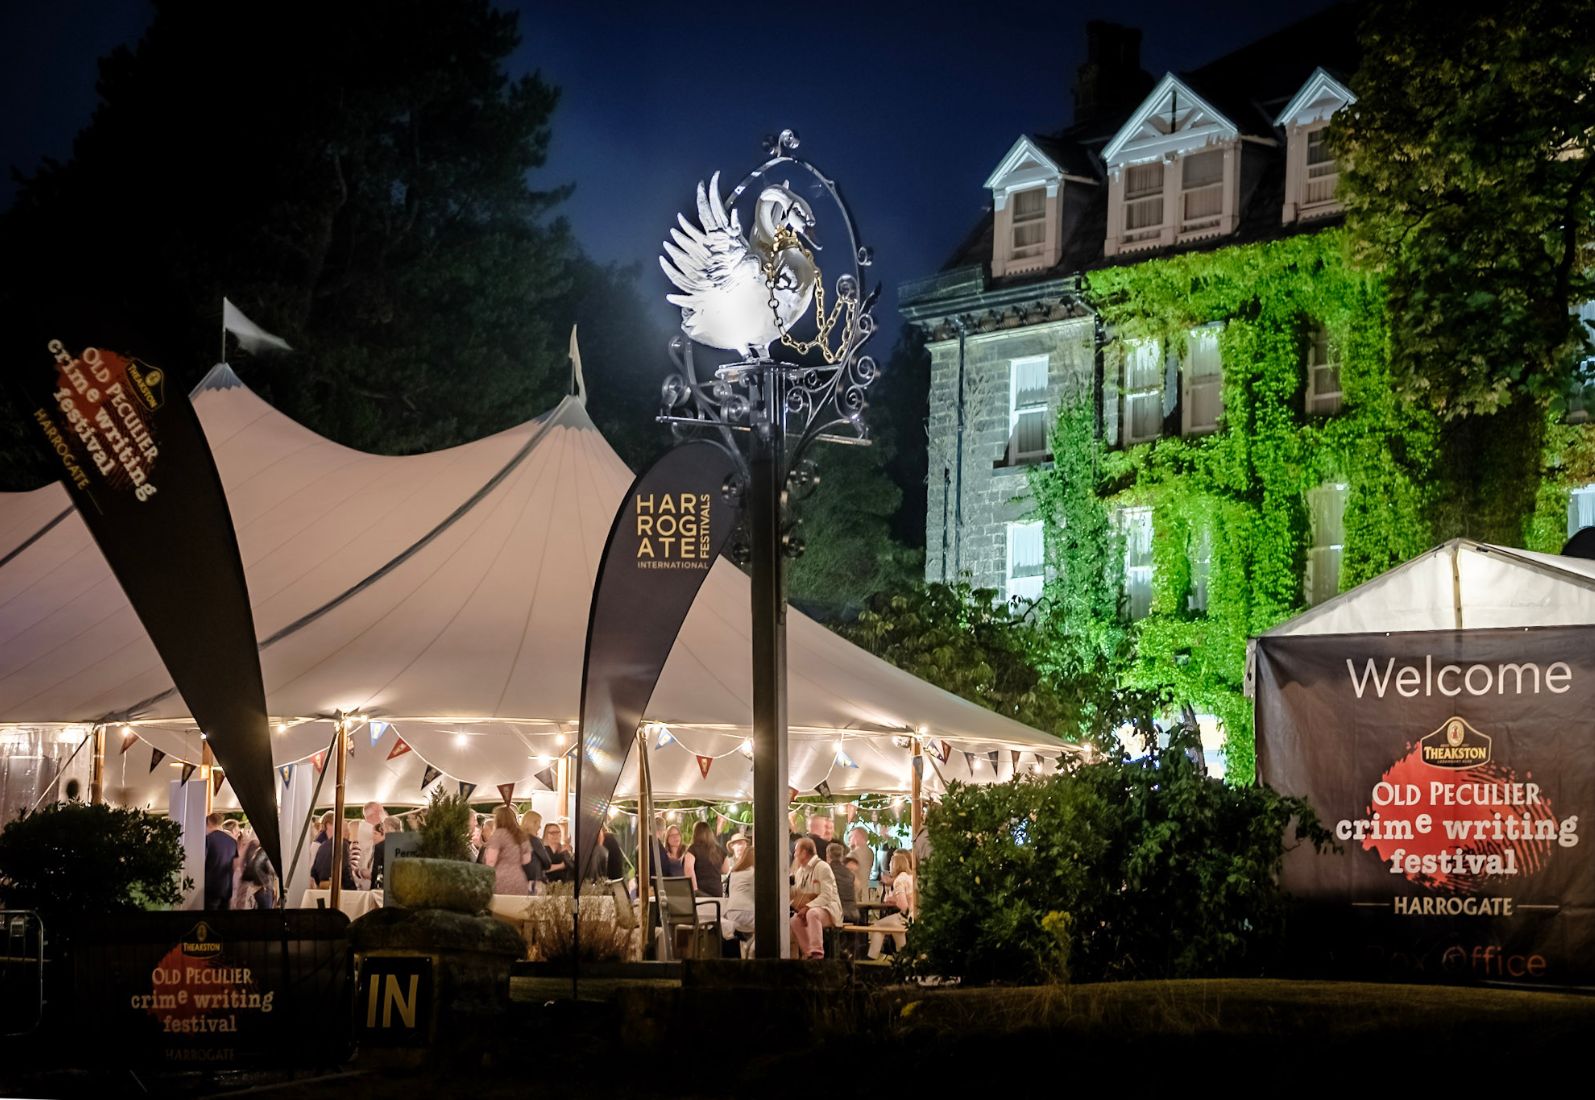 Theaston Old Peculier Crime writing Festival tent on the night of the Awards